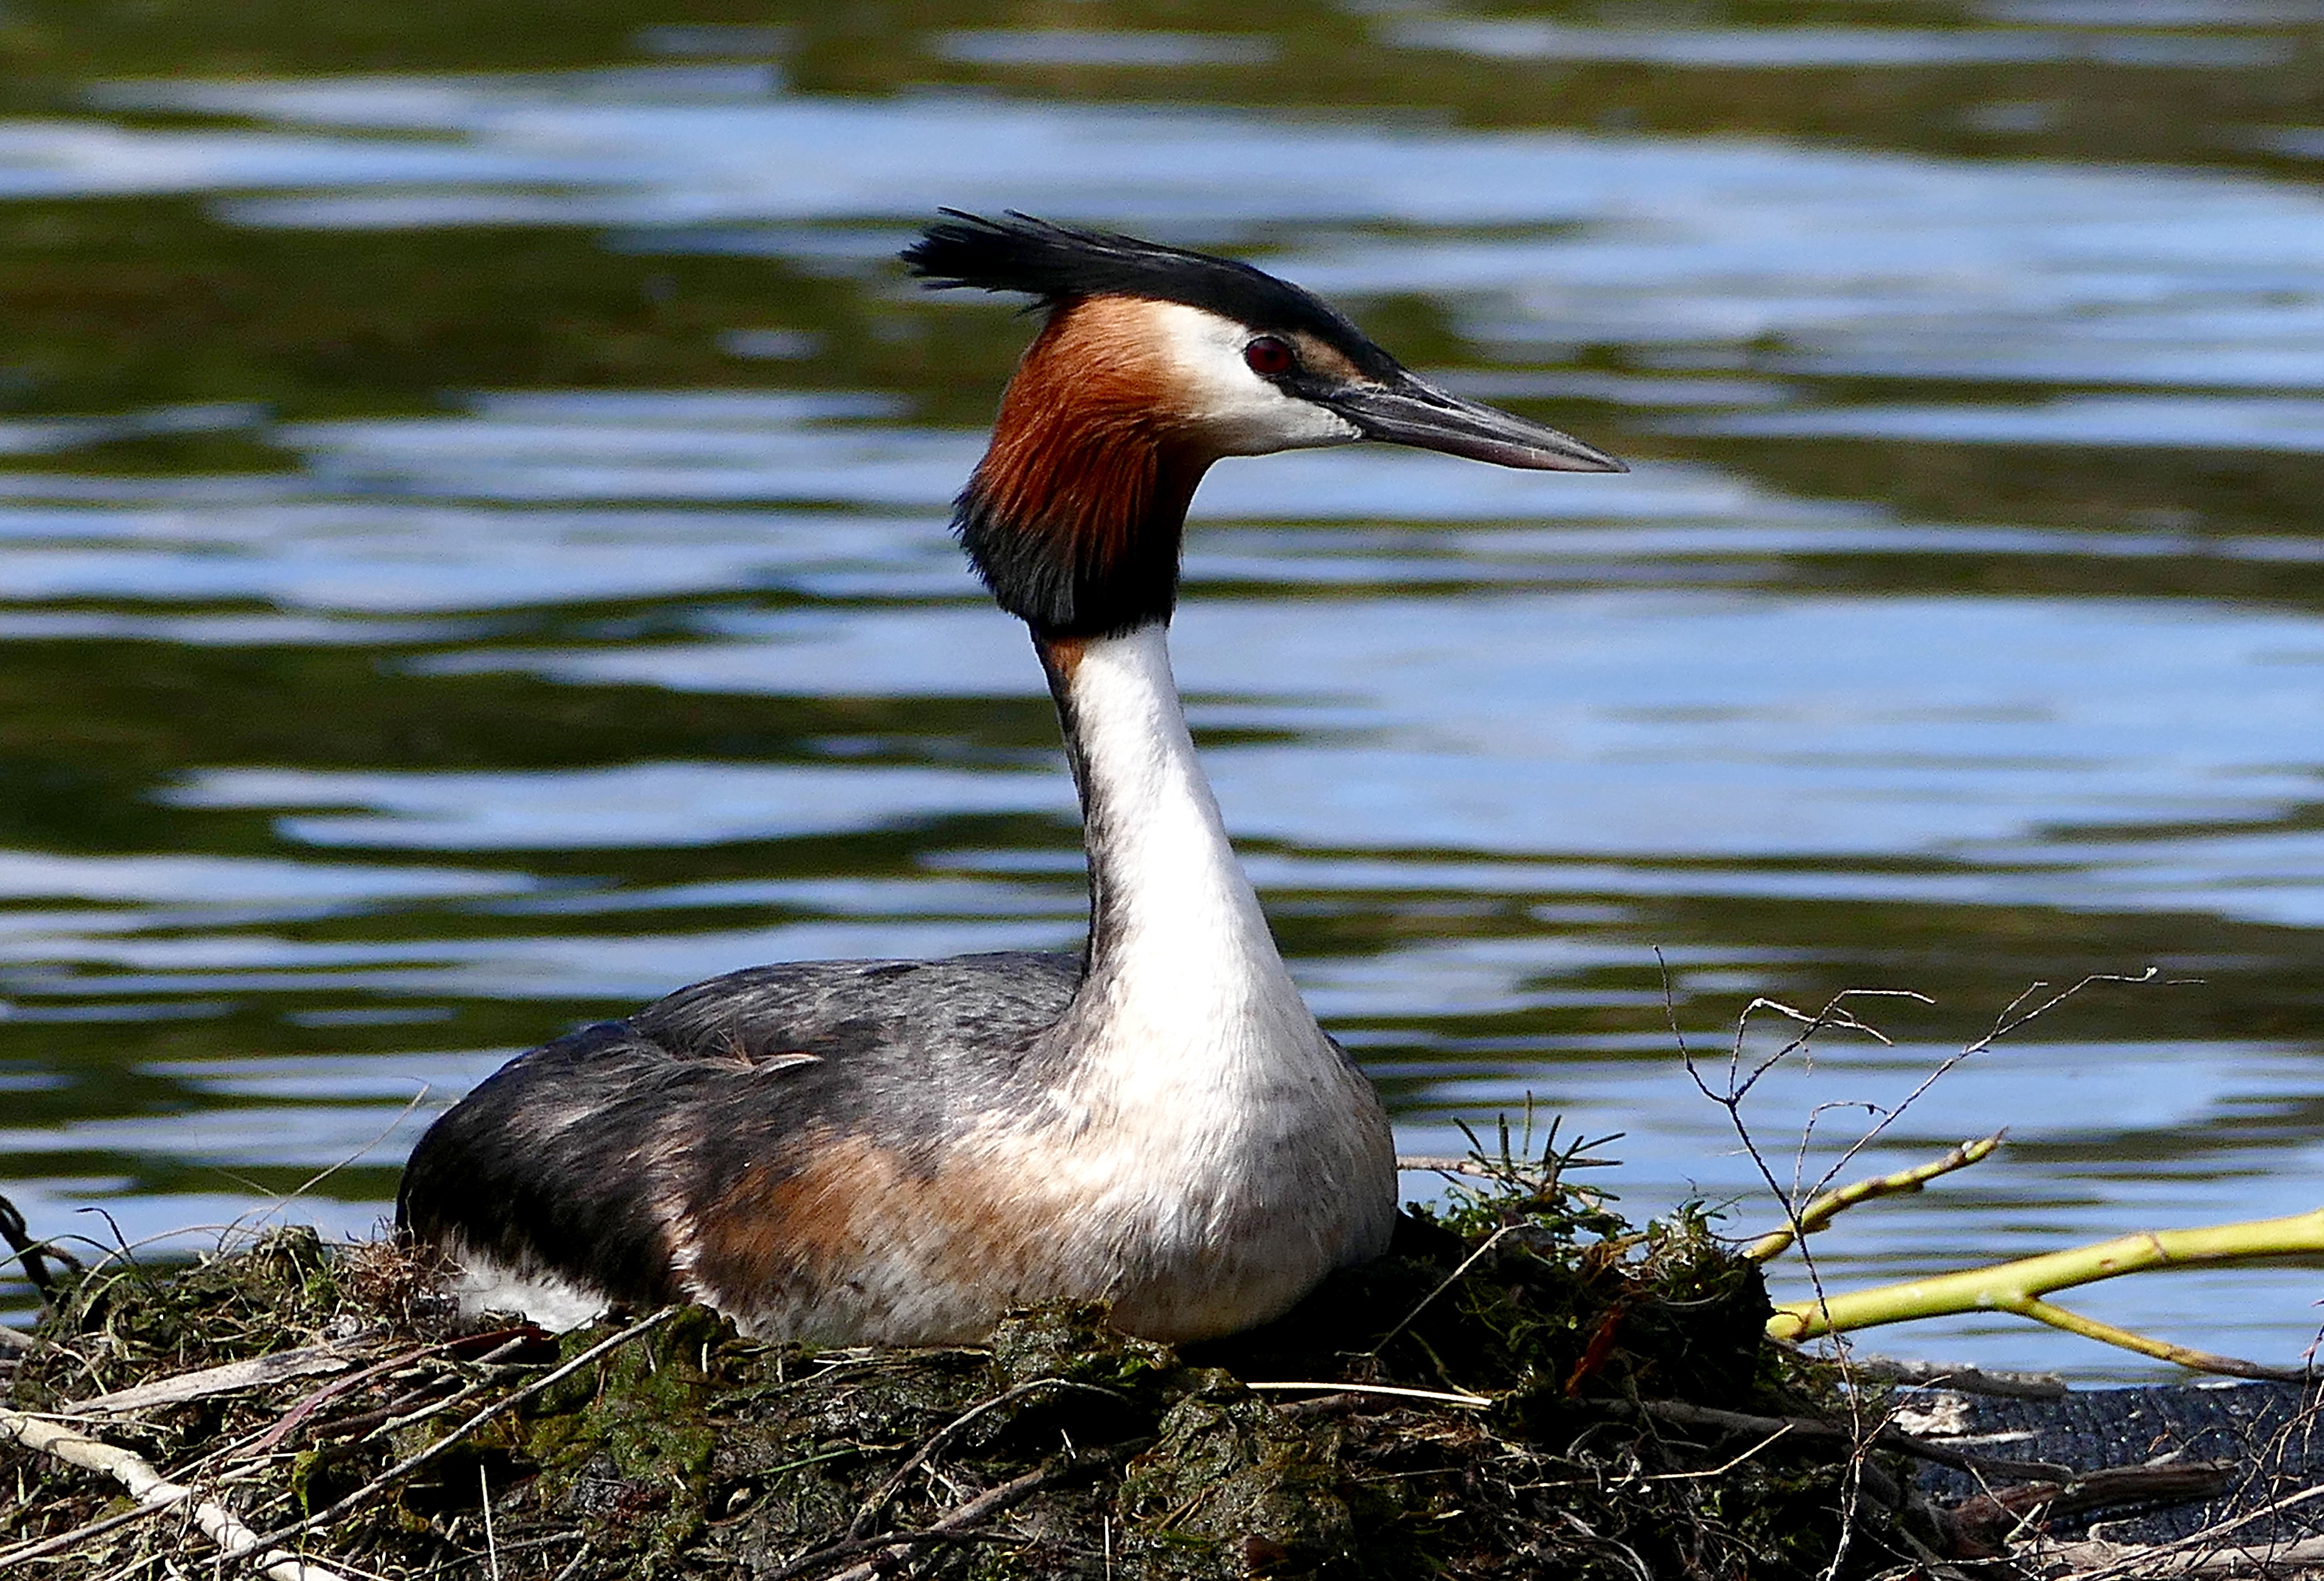 The Australasian crested grebe